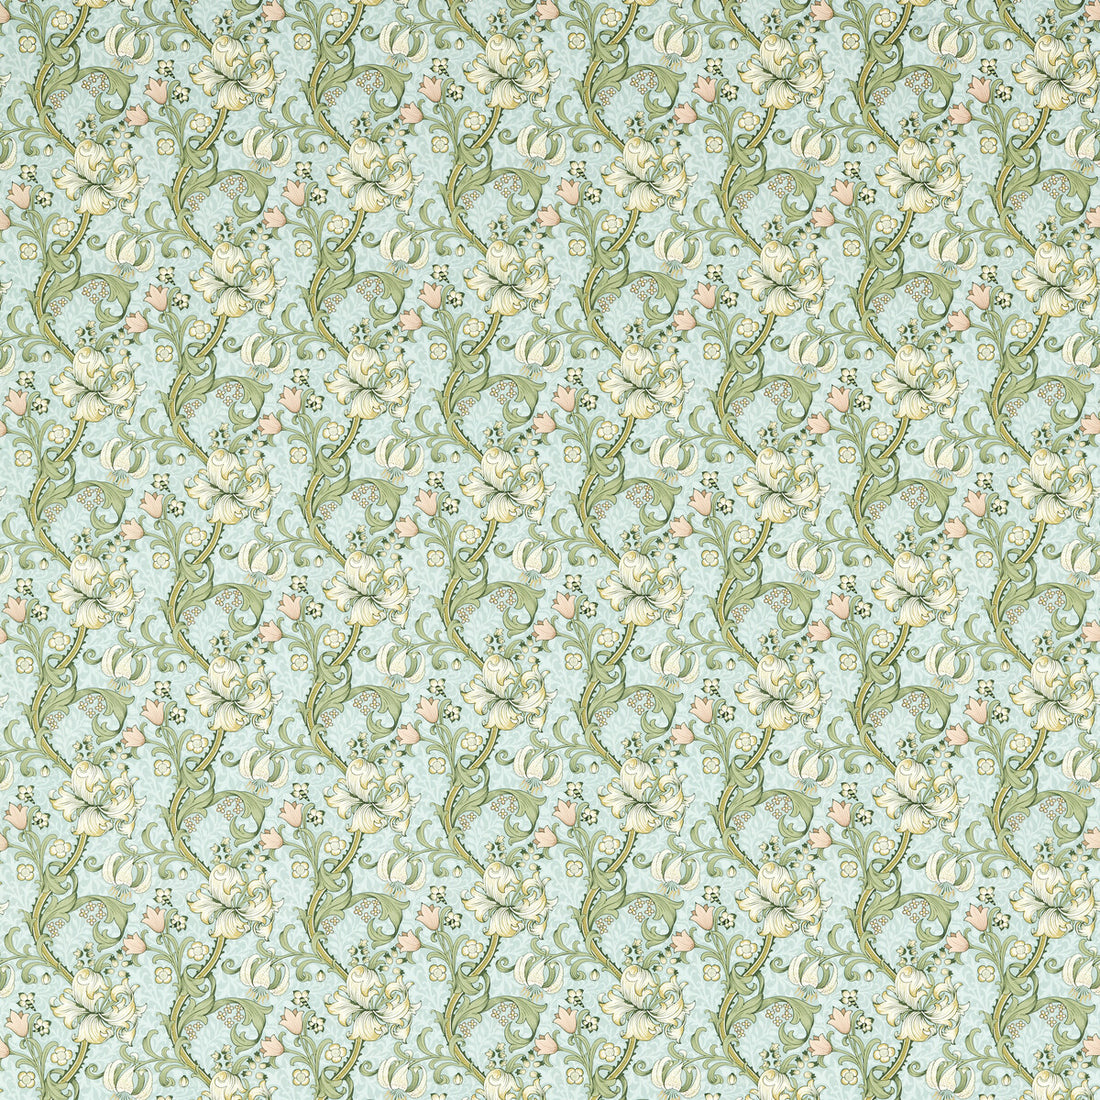 Golden Lily fabric in apple/blush color - pattern F1677/05.CAC.0 - by Clarke And Clarke in the Clarke &amp; Clarke William Morris Designs collection